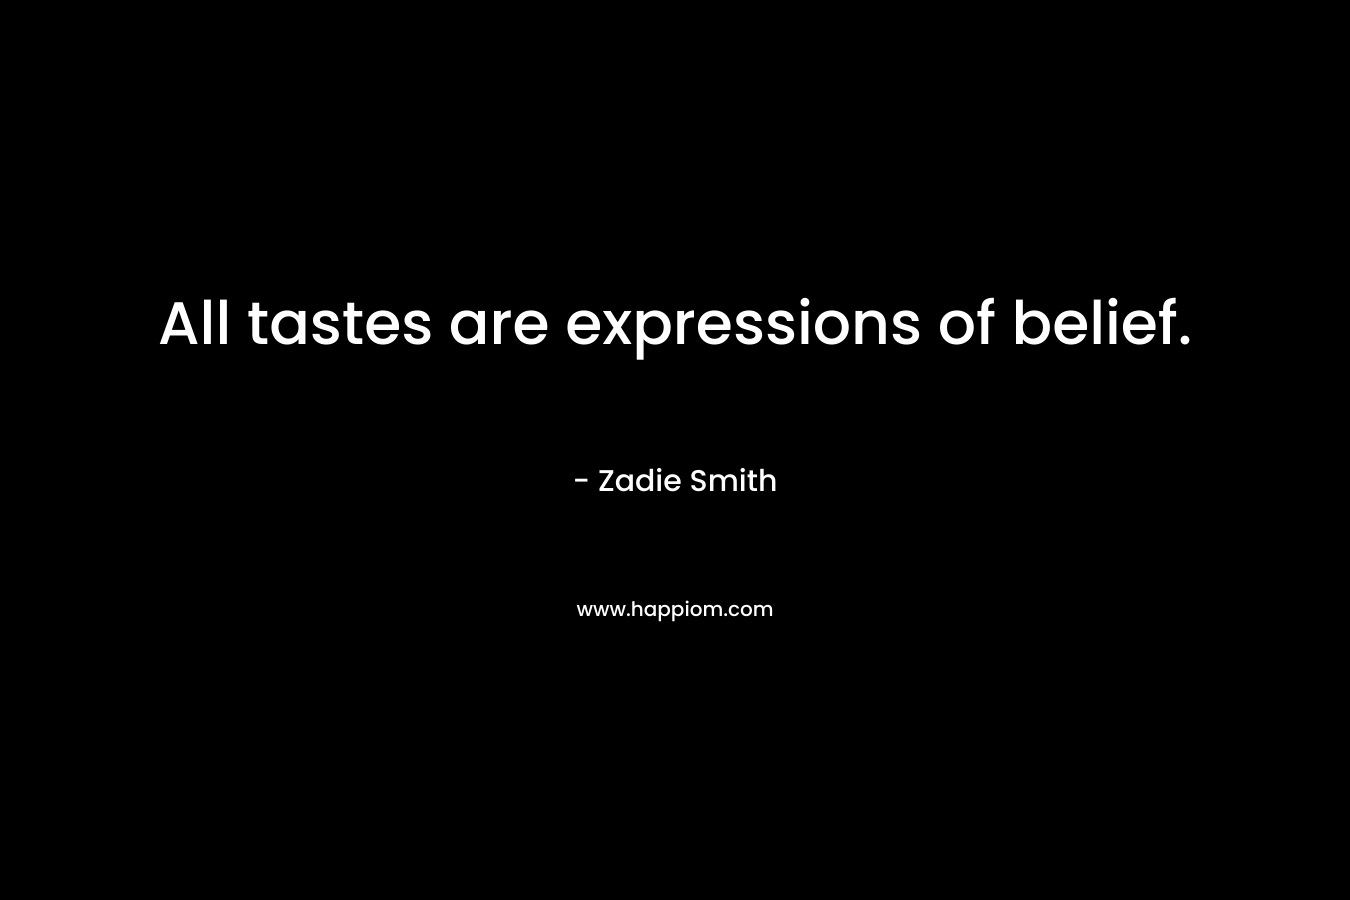 All tastes are expressions of belief.